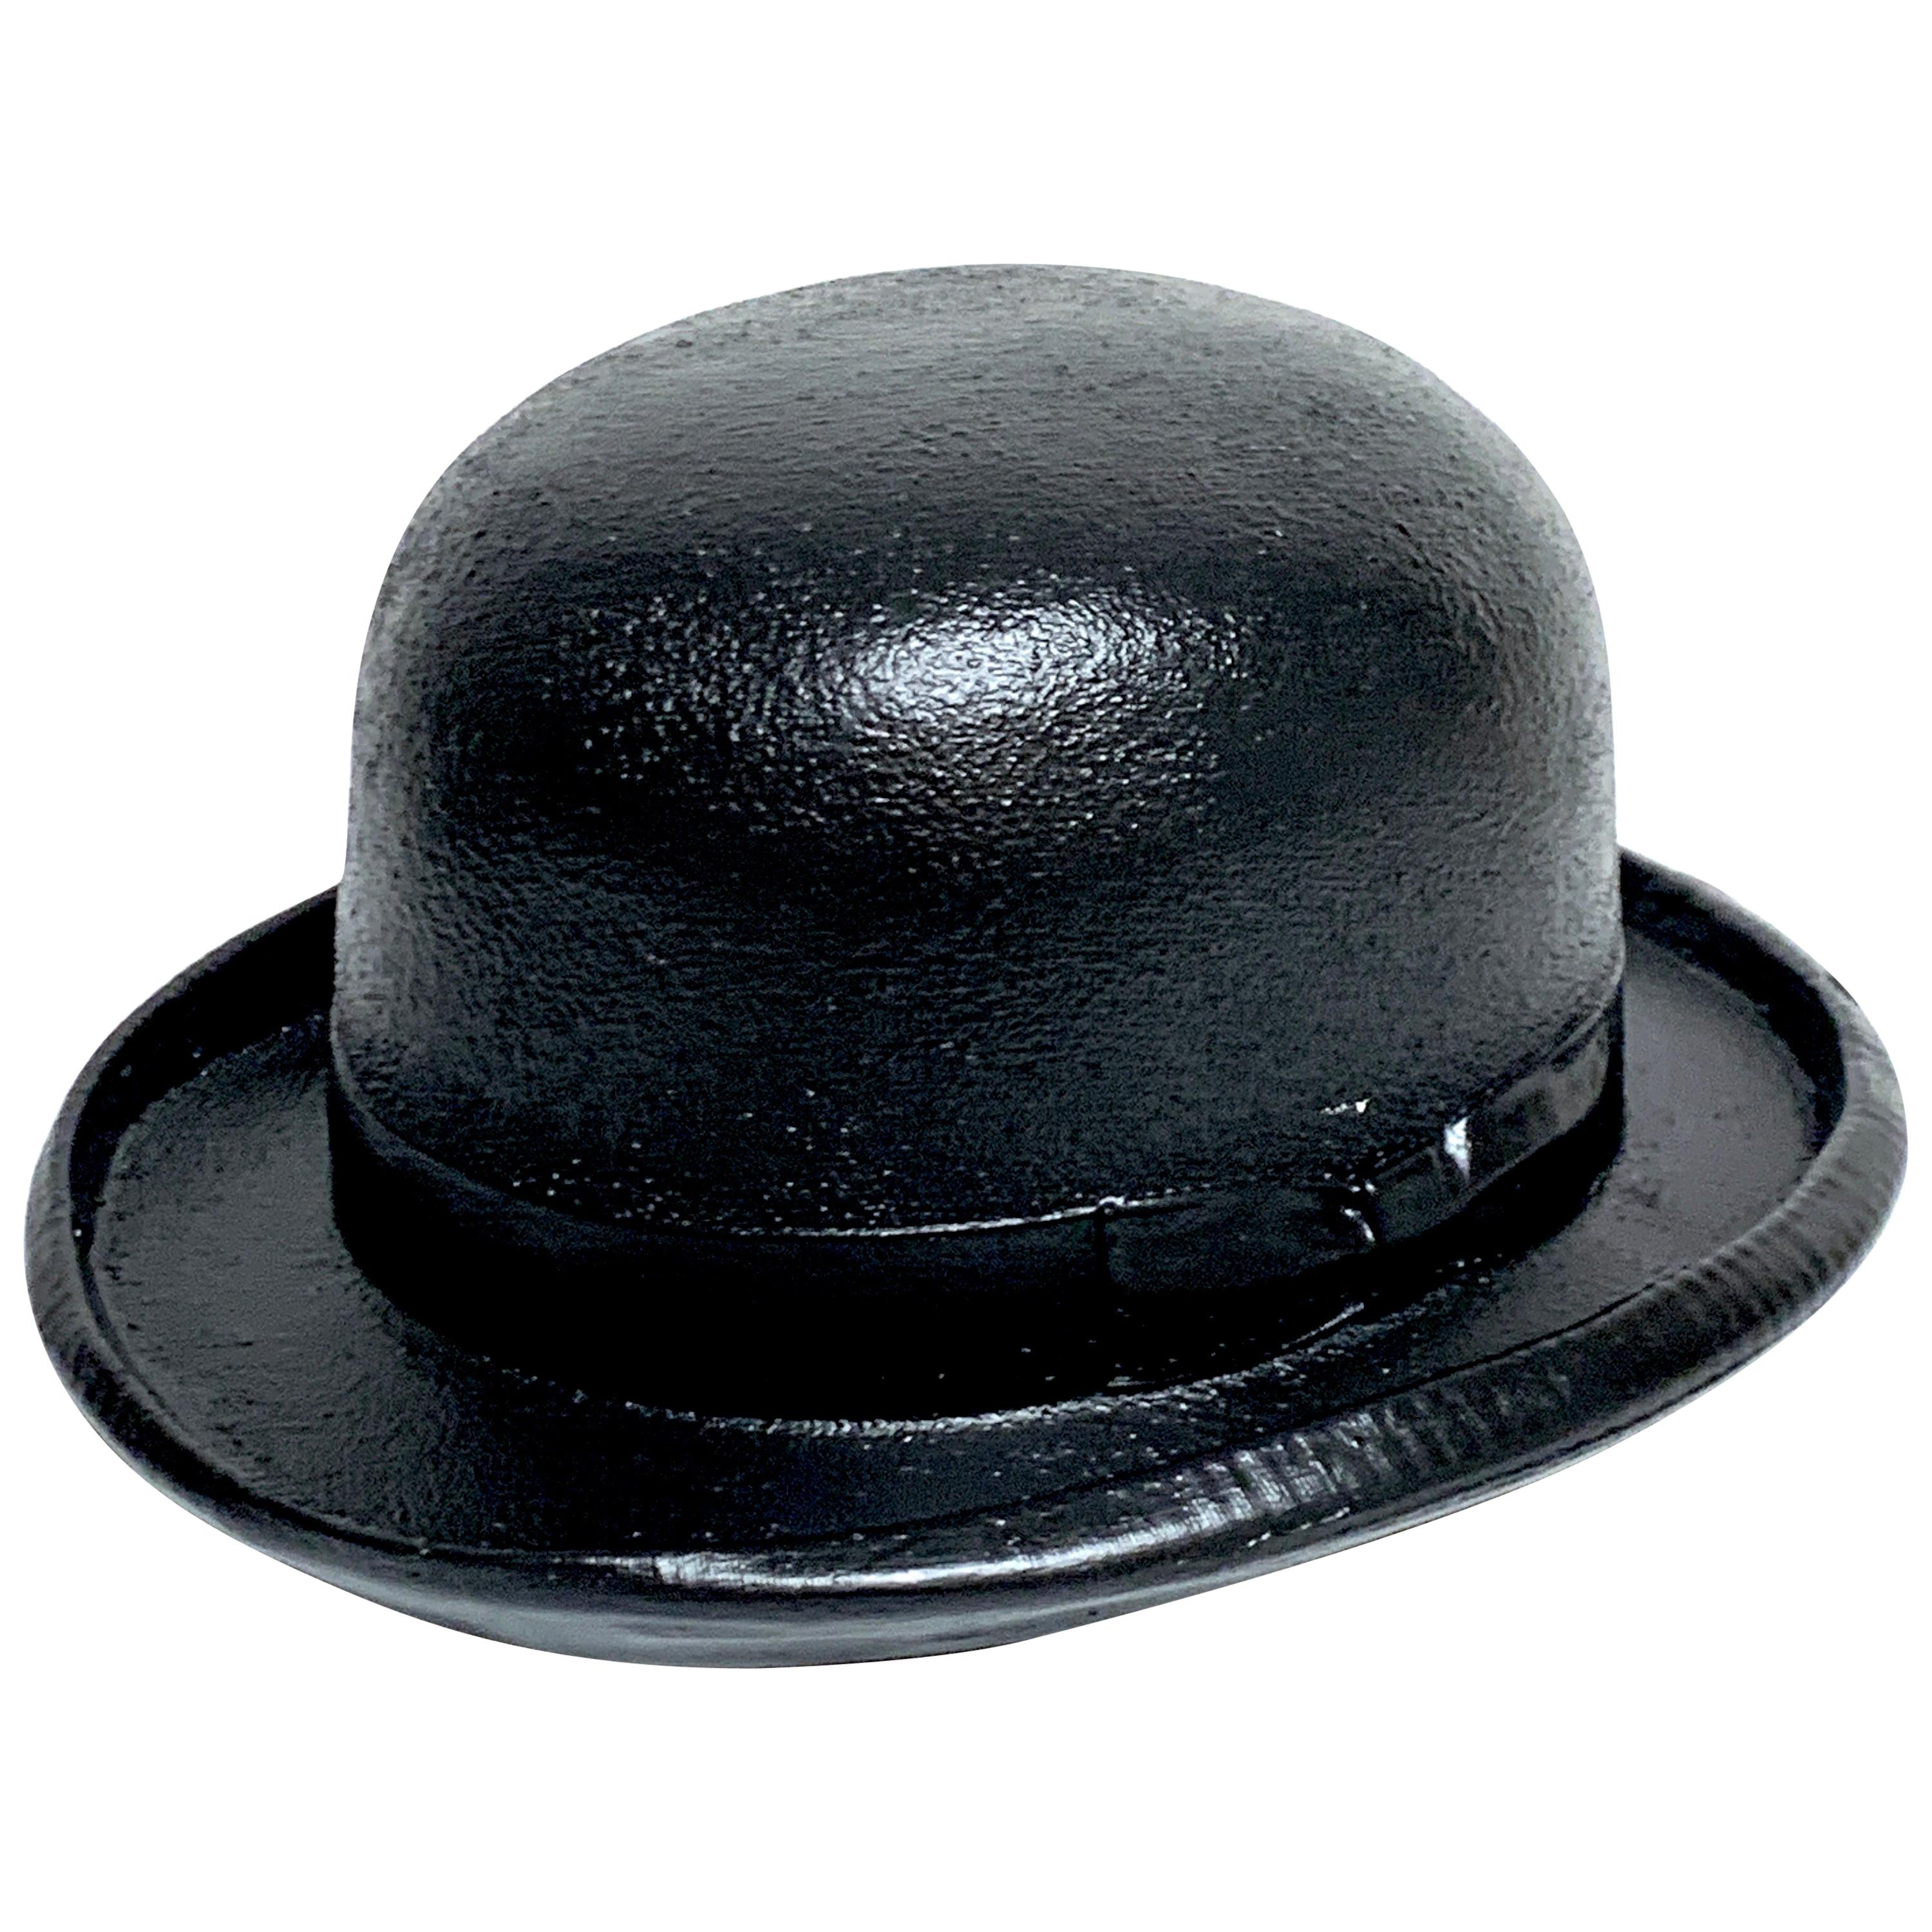 1970s Magritte Style Bowler Hat Sculpture